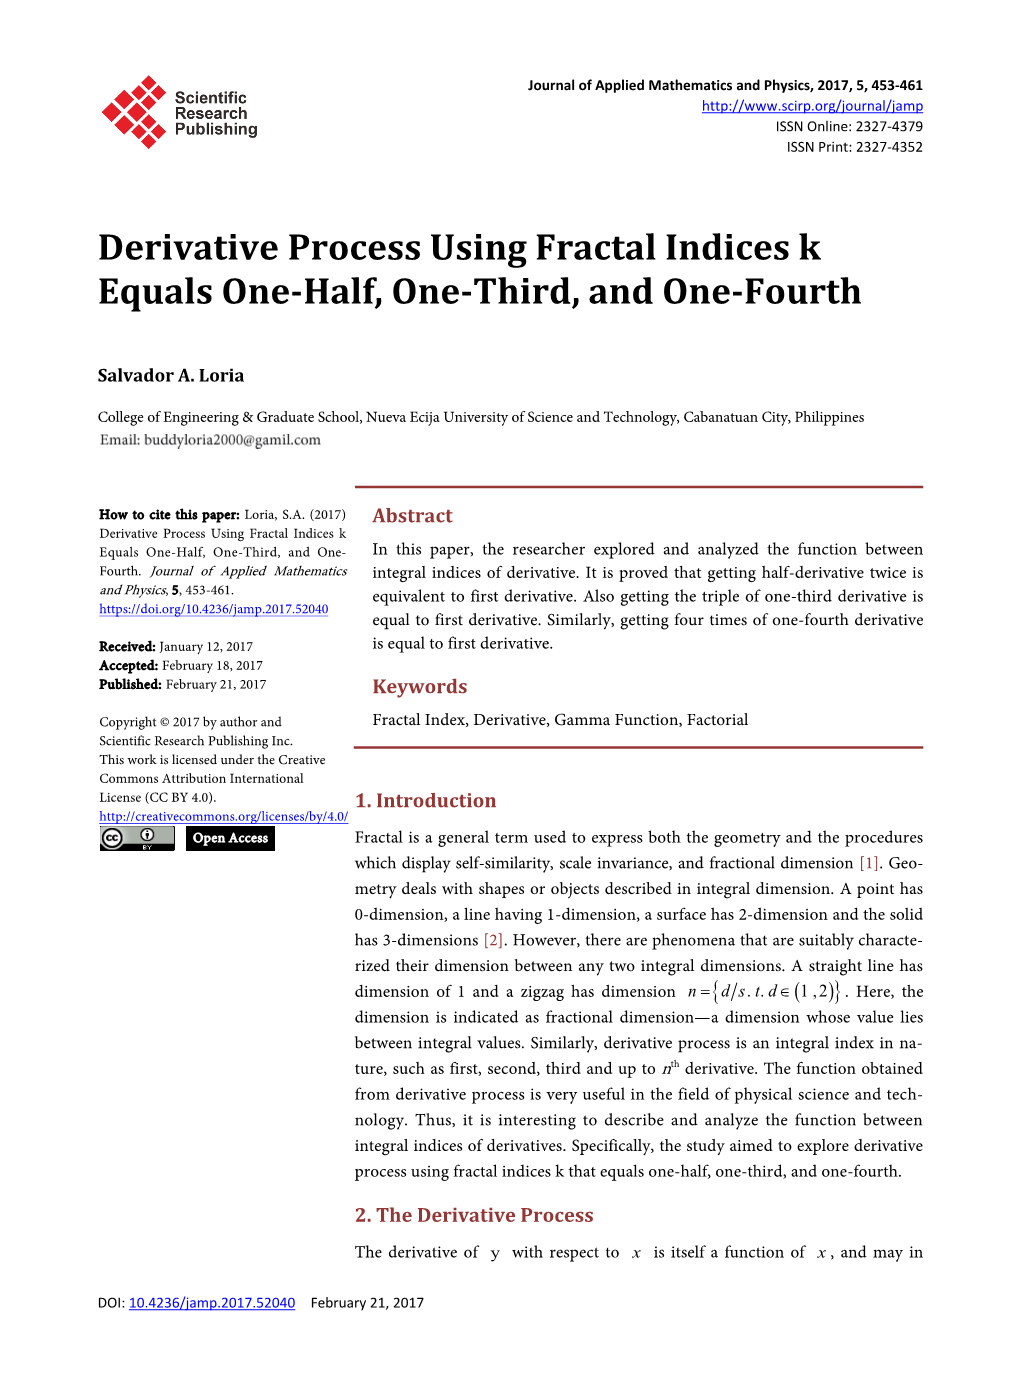 Derivative Process Using Fractal Indices K Equals One-Half, One-Third, and One-Fourth